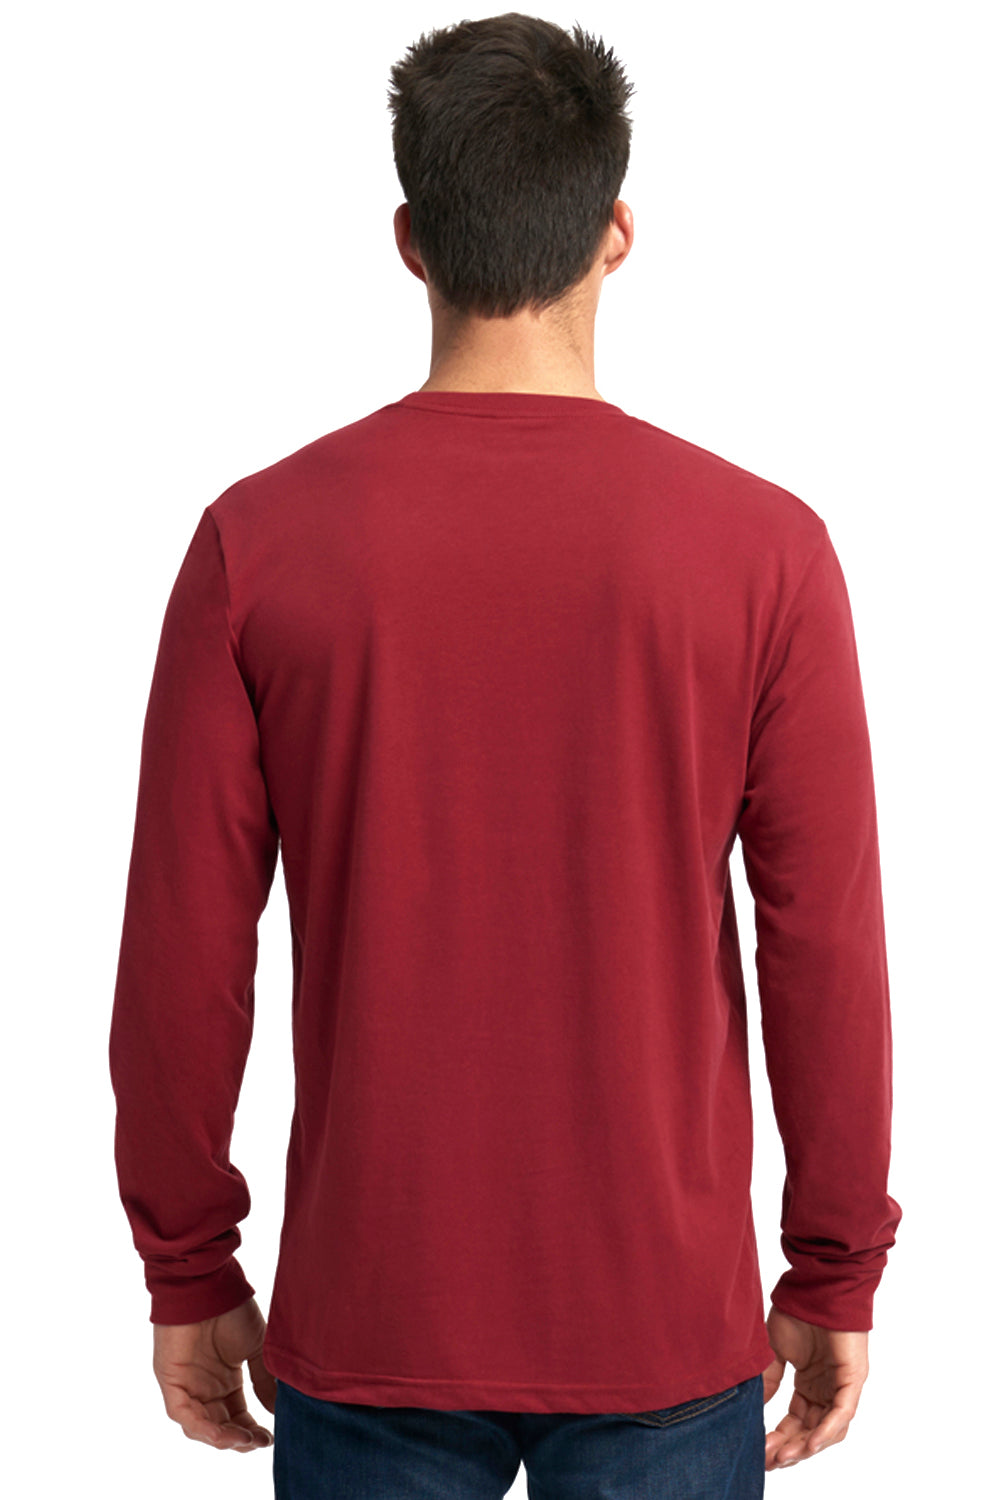 Next Level 6411 Sueded Jersey Long Sleeve Crewneck T-Shirt Cardinal Red Back